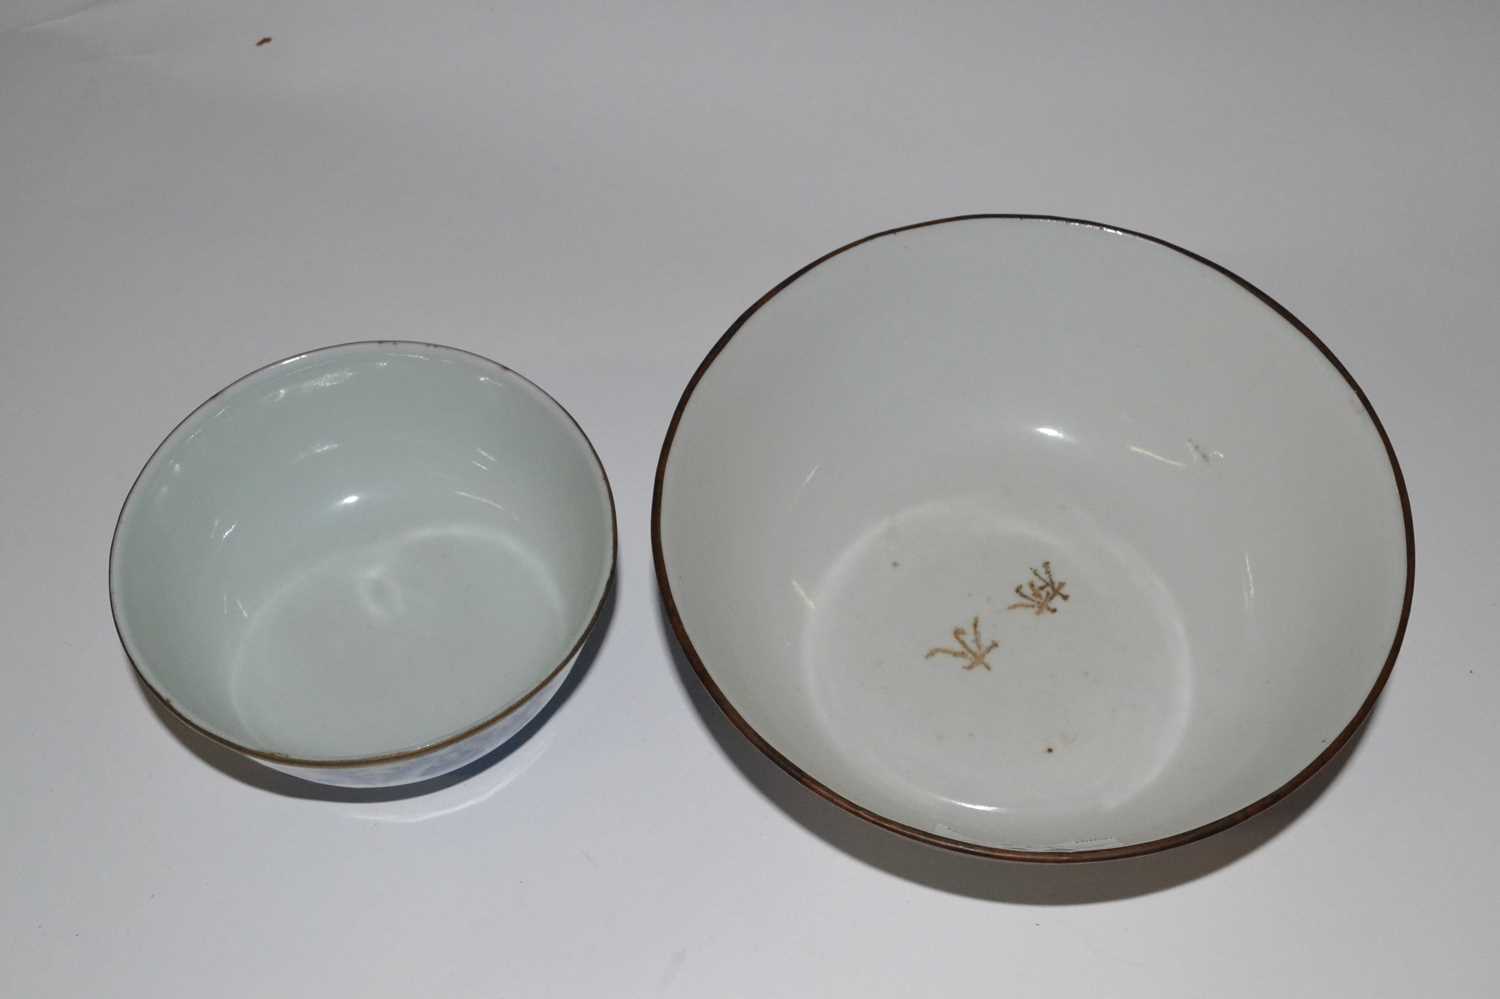 An Oriental porcelain bowl, possibly Japanese, with blue and white design and metal rim together - Image 2 of 3